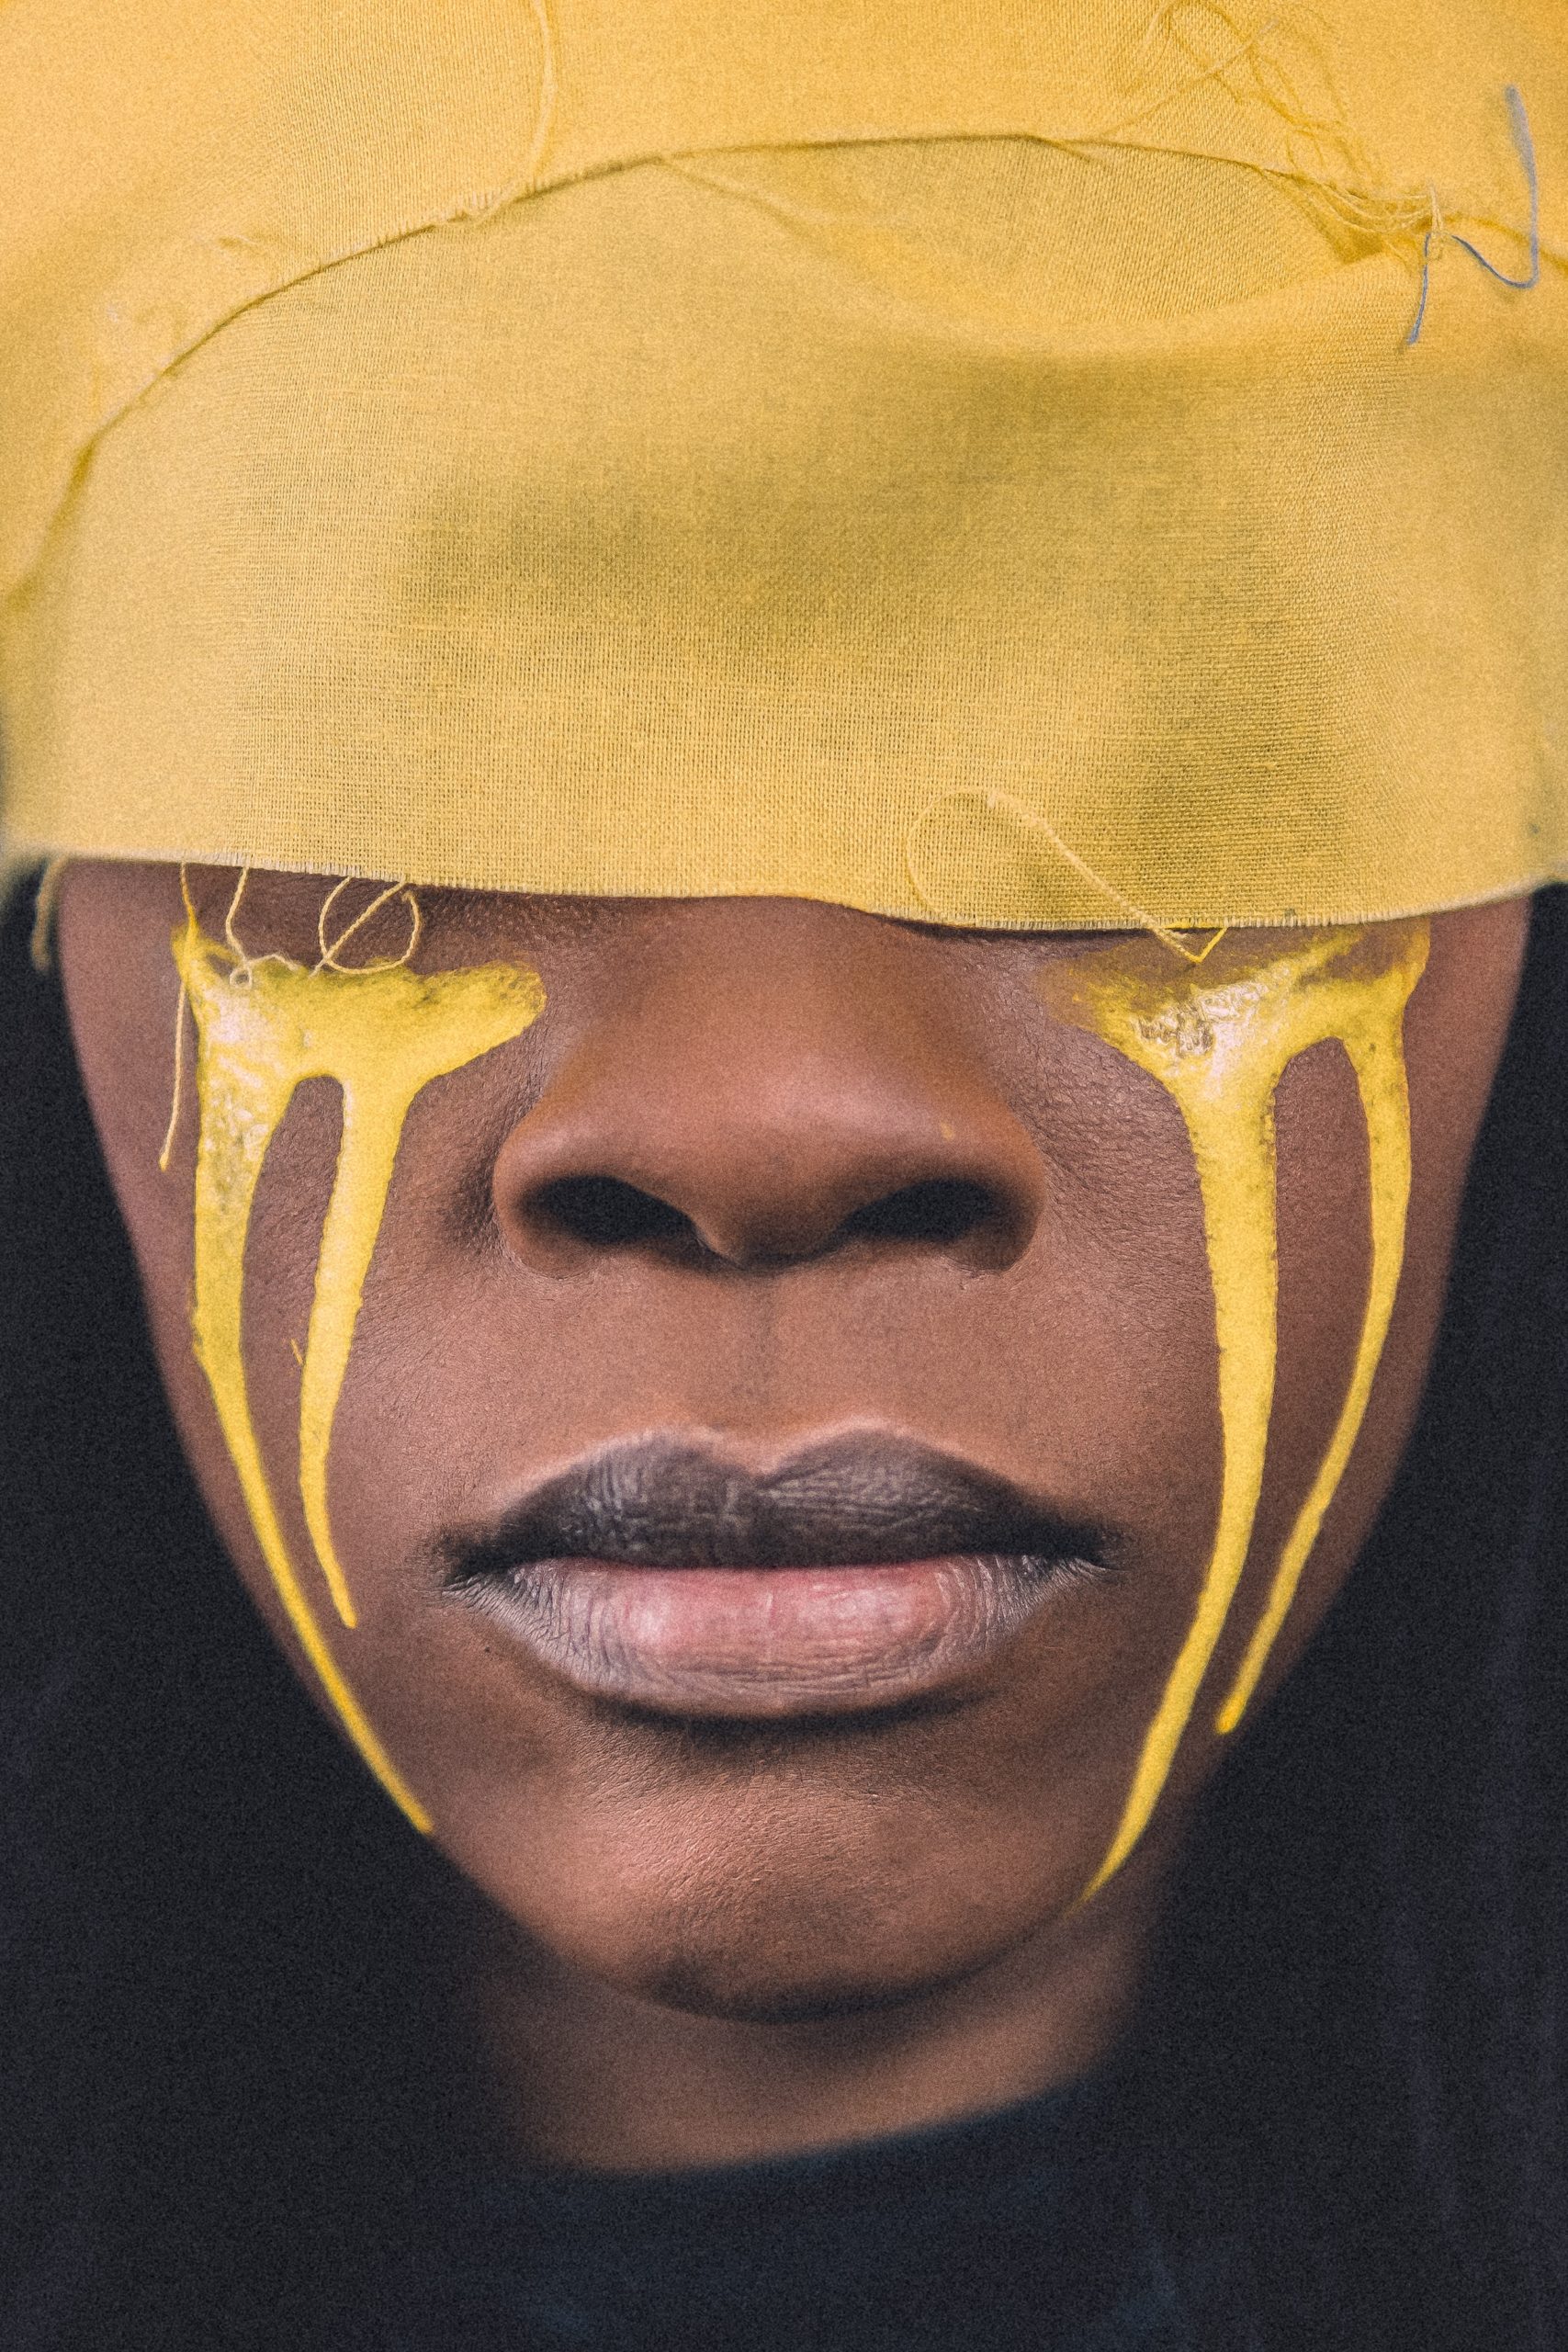 Black woman with a yellow strip around her eyes. Yellow paint like tears is painted down her face to her chin.